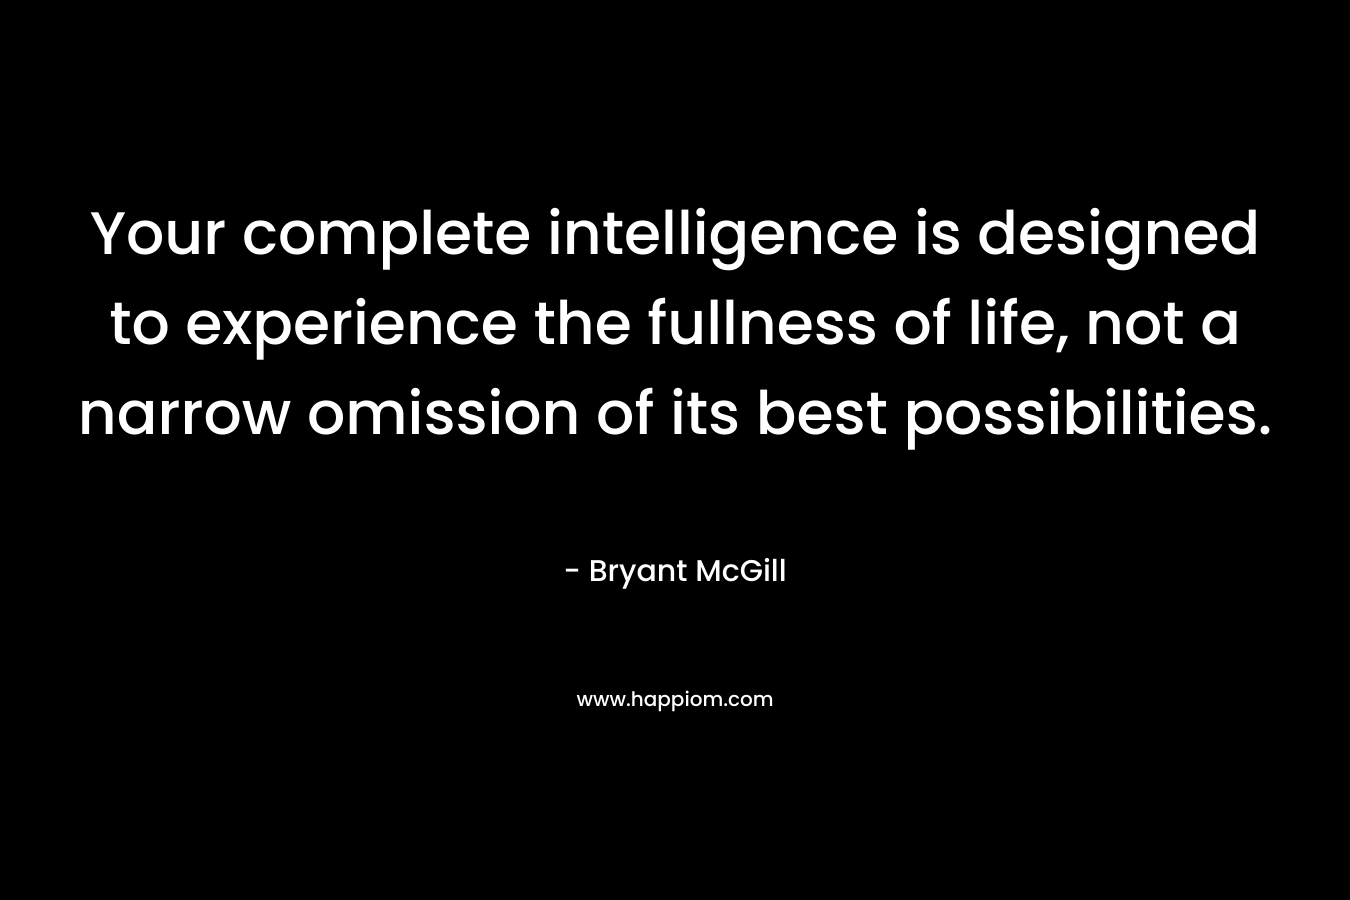 Your complete intelligence is designed to experience the fullness of life, not a narrow omission of its best possibilities.